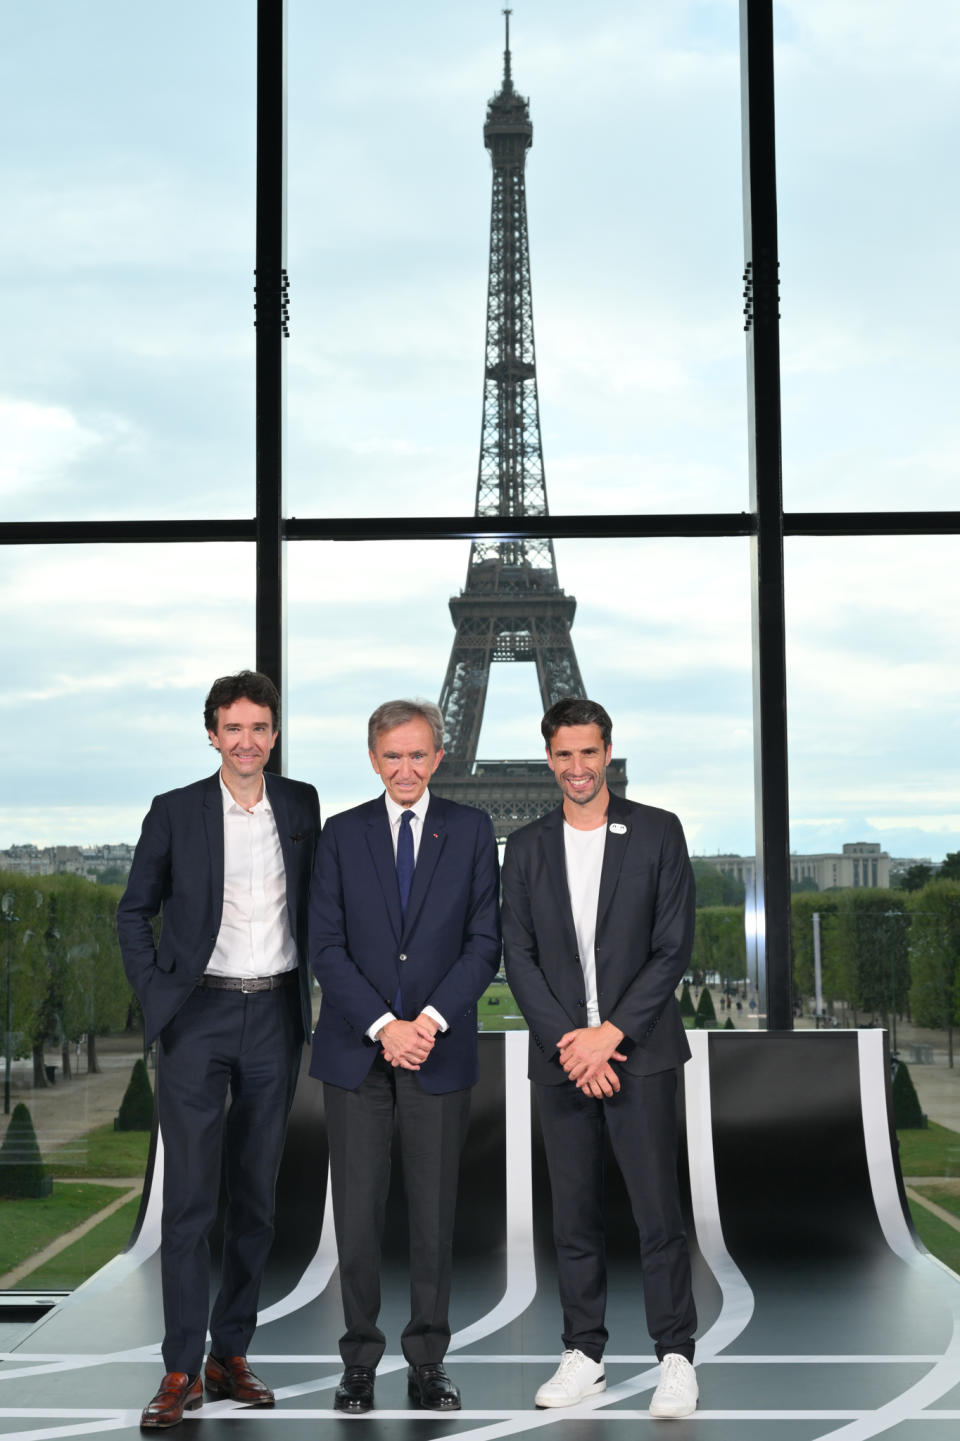 Antoine Arnault, head of communications, image and environment at LVMH, Bernard Arnault, chairman and CEO of LVMH, and Tony Estanguet, president of the Paris 2024 Organizing Committee for the Olympic and Paralympic Games.